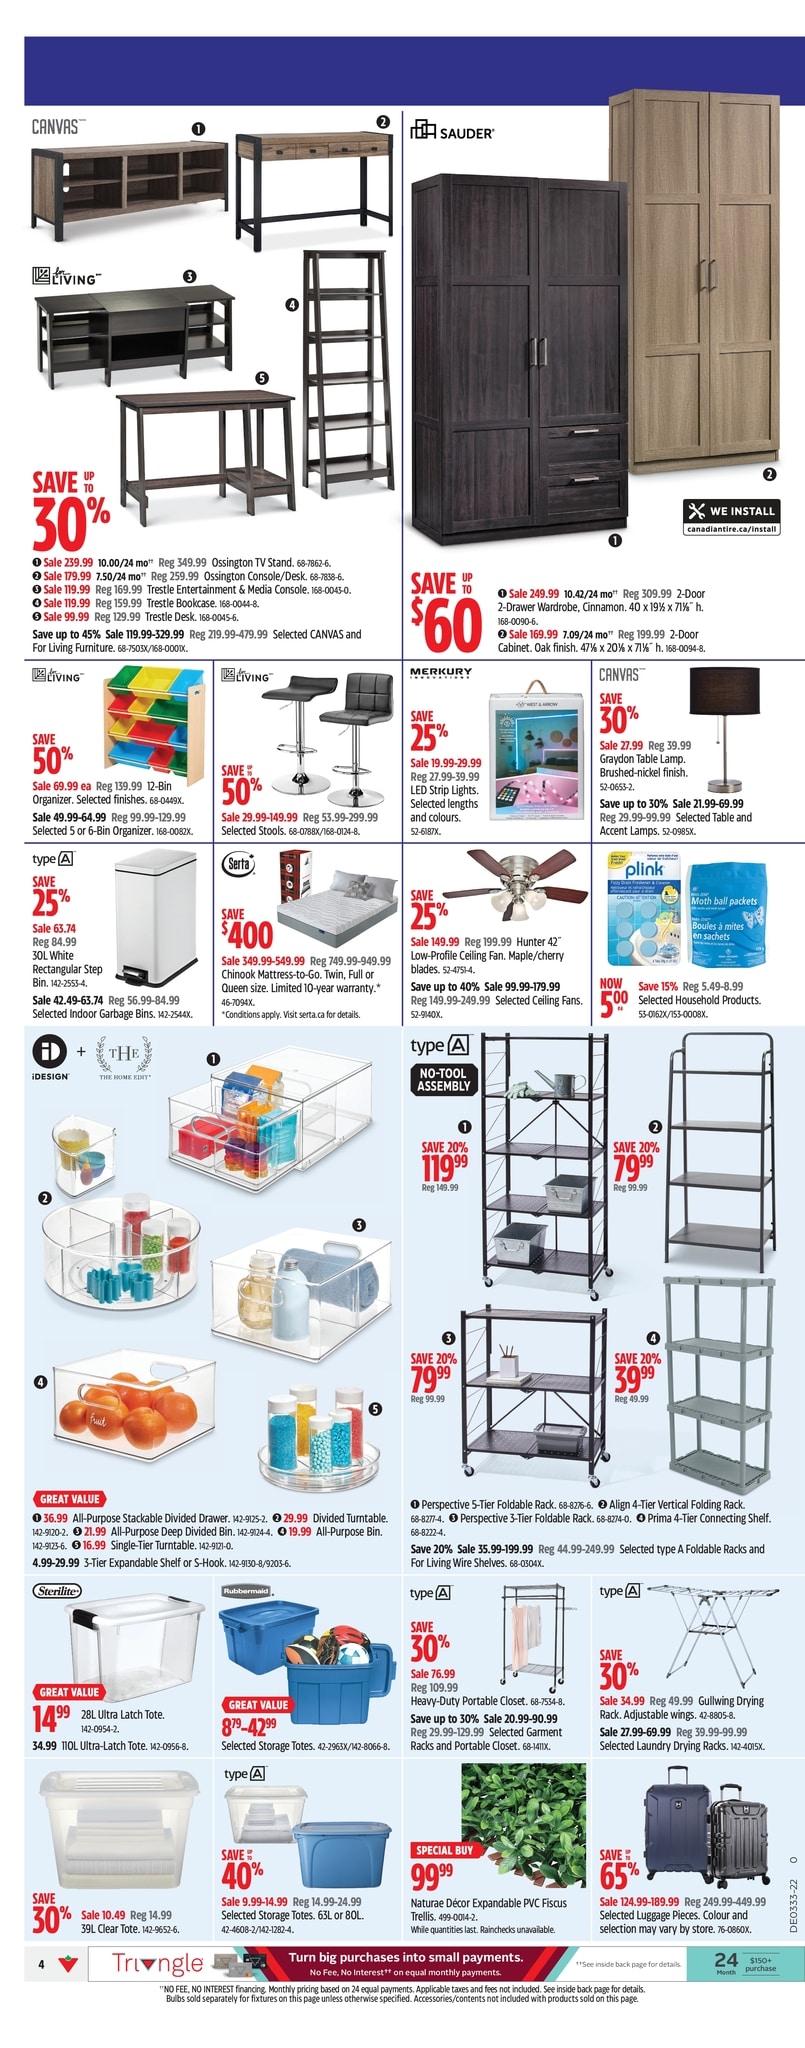 Canadian Tire - Weekly Flyer Specials - Page 4